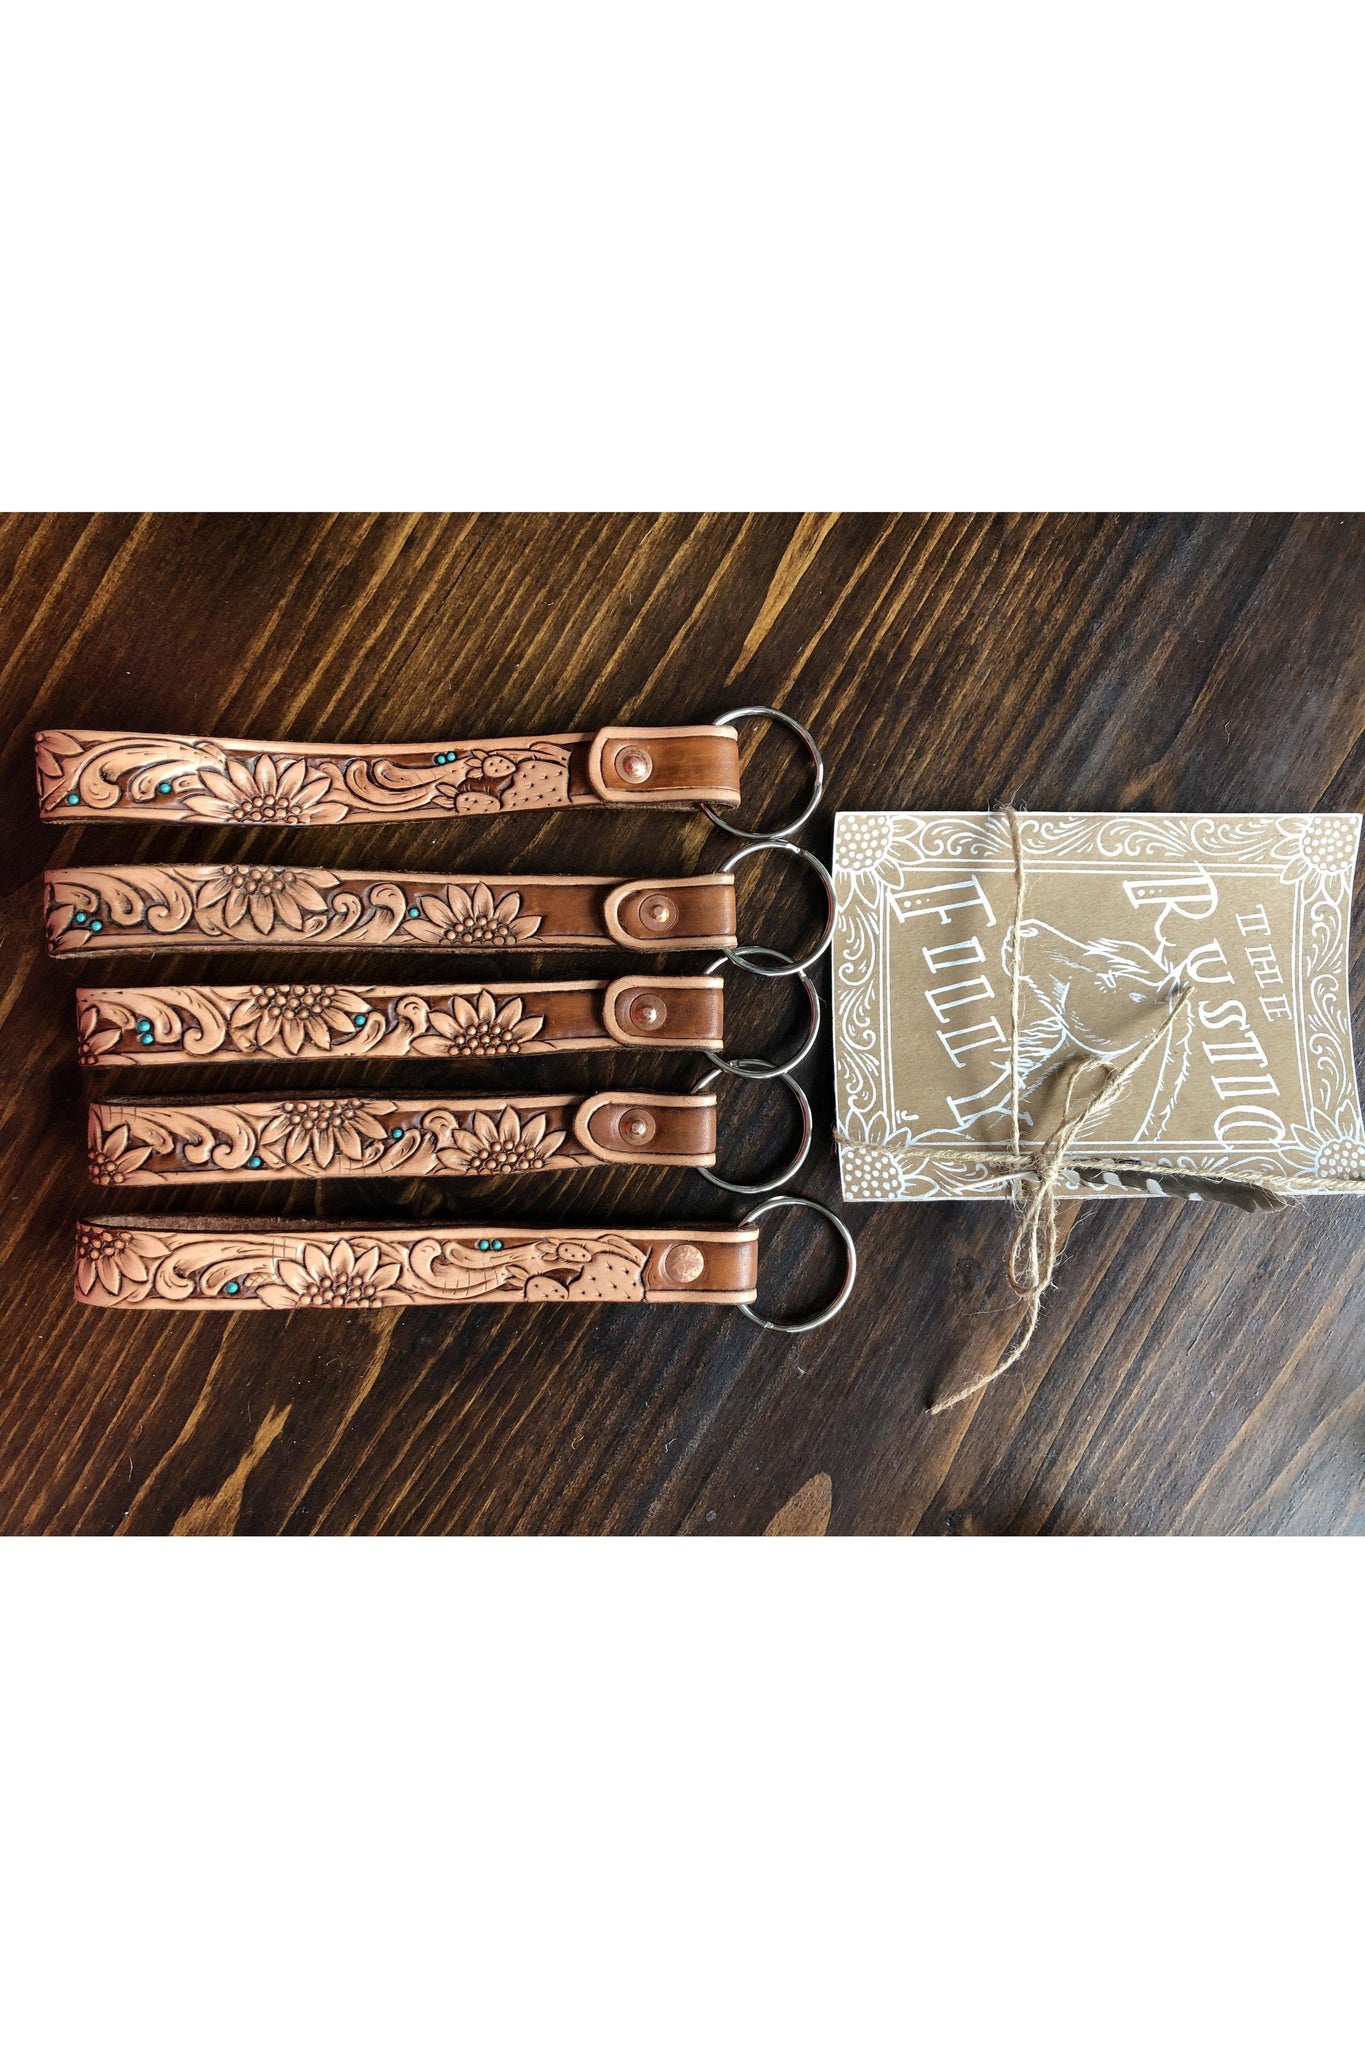 Rustic Filly Wristlet